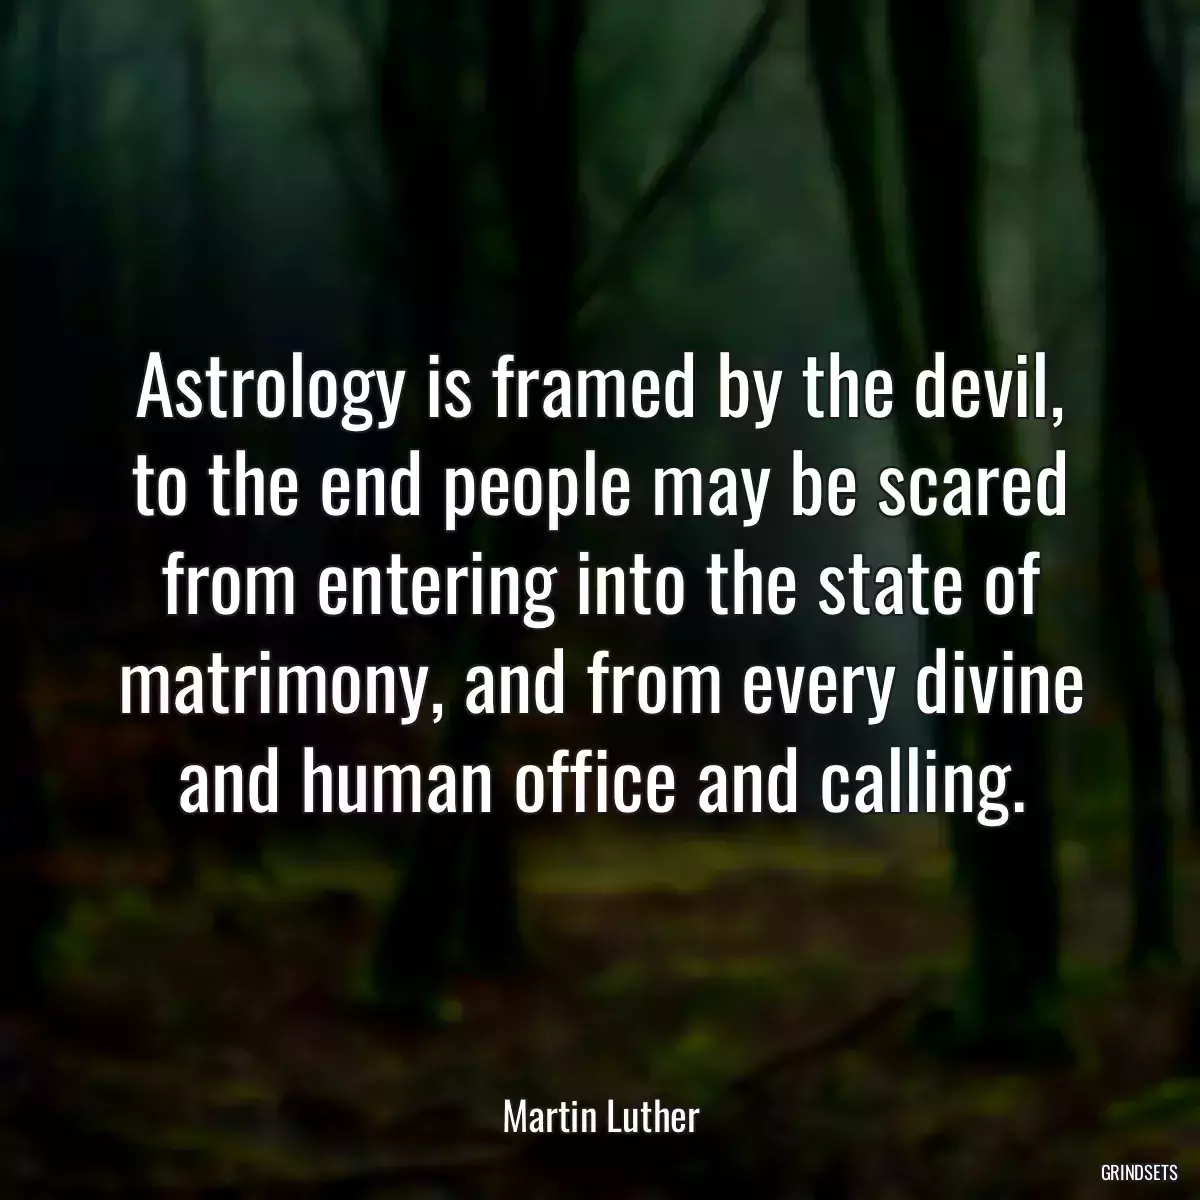 Astrology is framed by the devil, to the end people may be scared from entering into the state of matrimony, and from every divine and human office and calling.